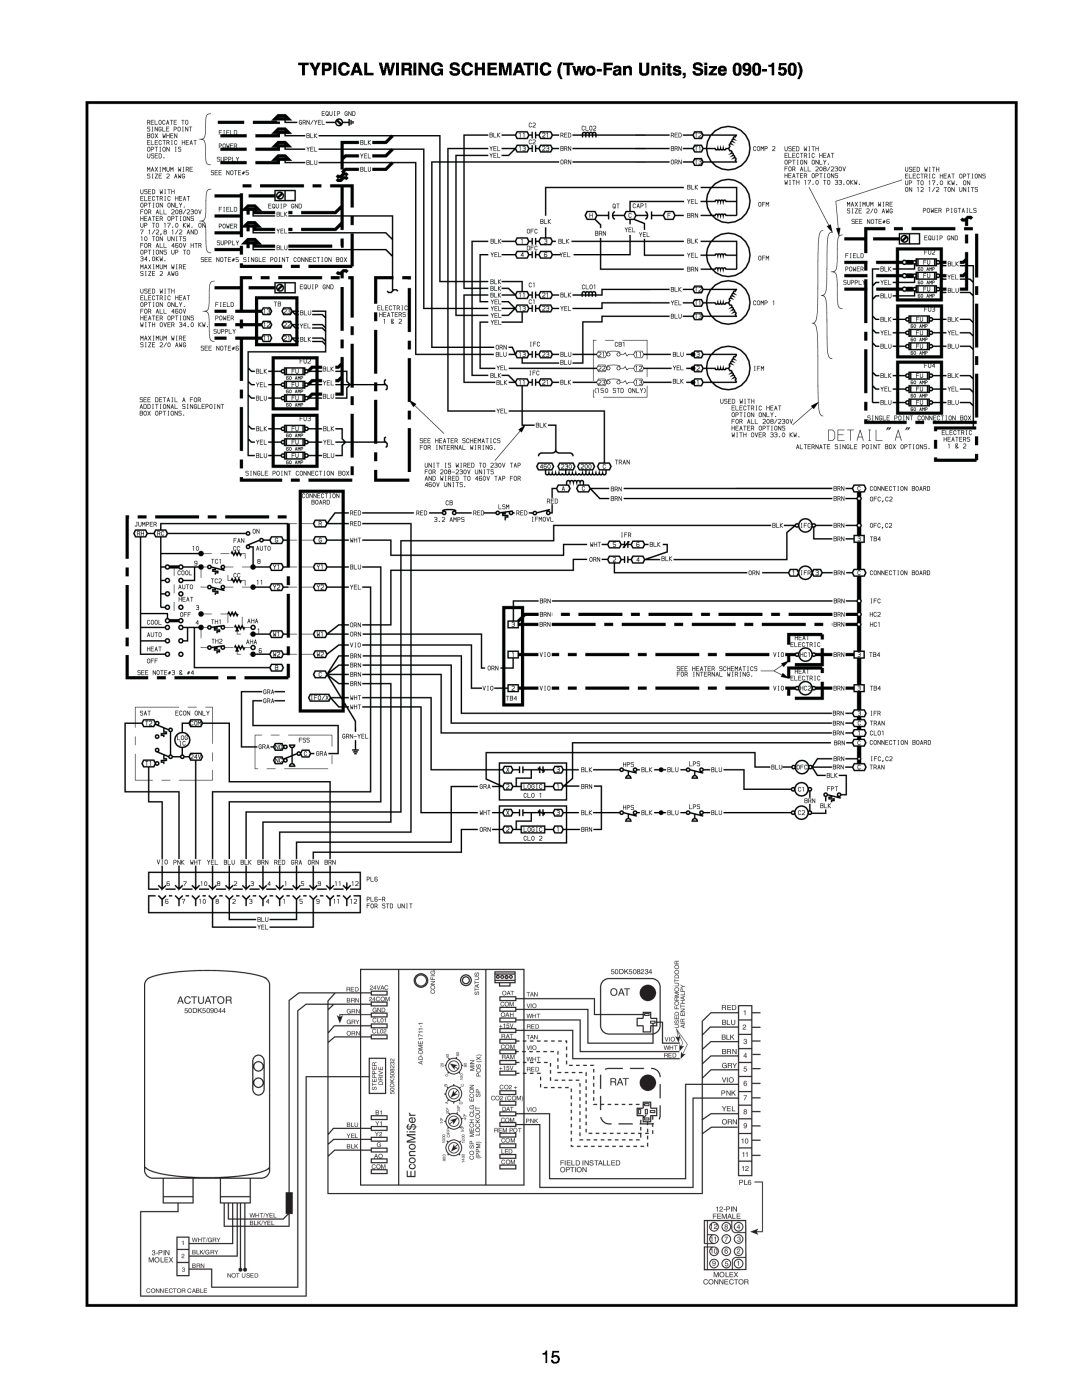 Bryant 558F, 551B, 551A manual TYPICAL WIRING SCHEMATIC Two-Fan Units, Size, EconoMi$er, Actuator 